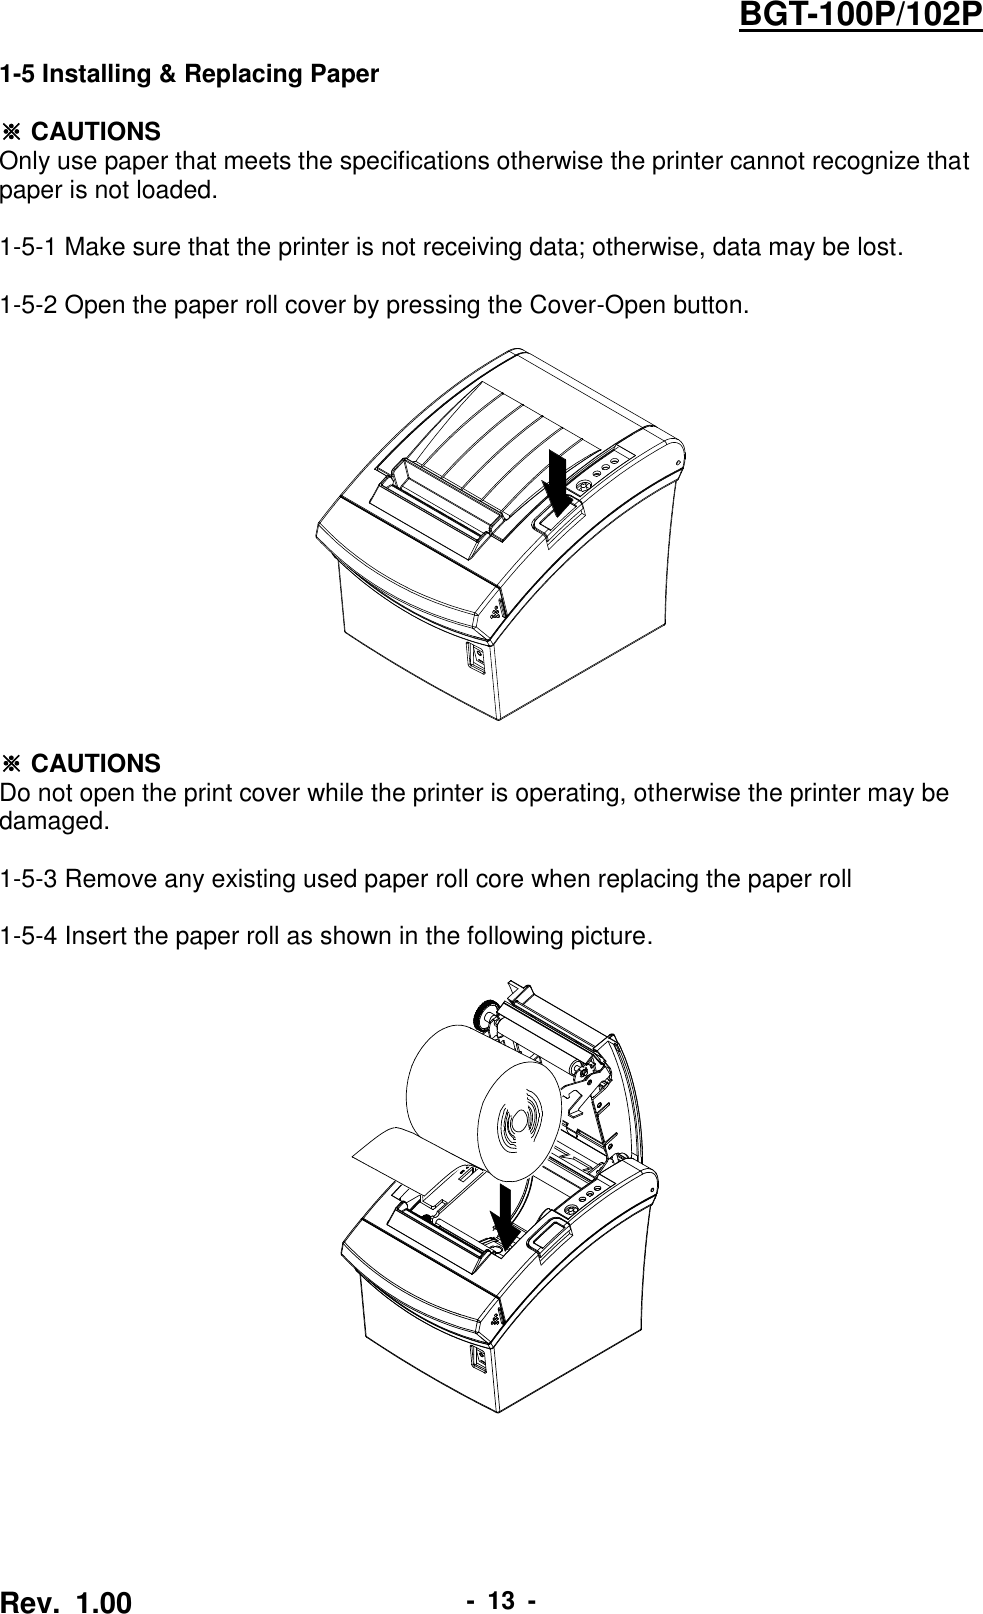  Rev.  1.00 -  13  - BGT-100P/102P 1-5 Installing &amp; Replacing Paper  ※ CAUTIONS Only use paper that meets the specifications otherwise the printer cannot recognize that   paper is not loaded.  1-5-1 Make sure that the printer is not receiving data; otherwise, data may be lost.  1-5-2 Open the paper roll cover by pressing the Cover-Open button.      ※ CAUTIONS Do not open the print cover while the printer is operating, otherwise the printer may be damaged.  1-5-3 Remove any existing used paper roll core when replacing the paper roll  1-5-4 Insert the paper roll as shown in the following picture.    